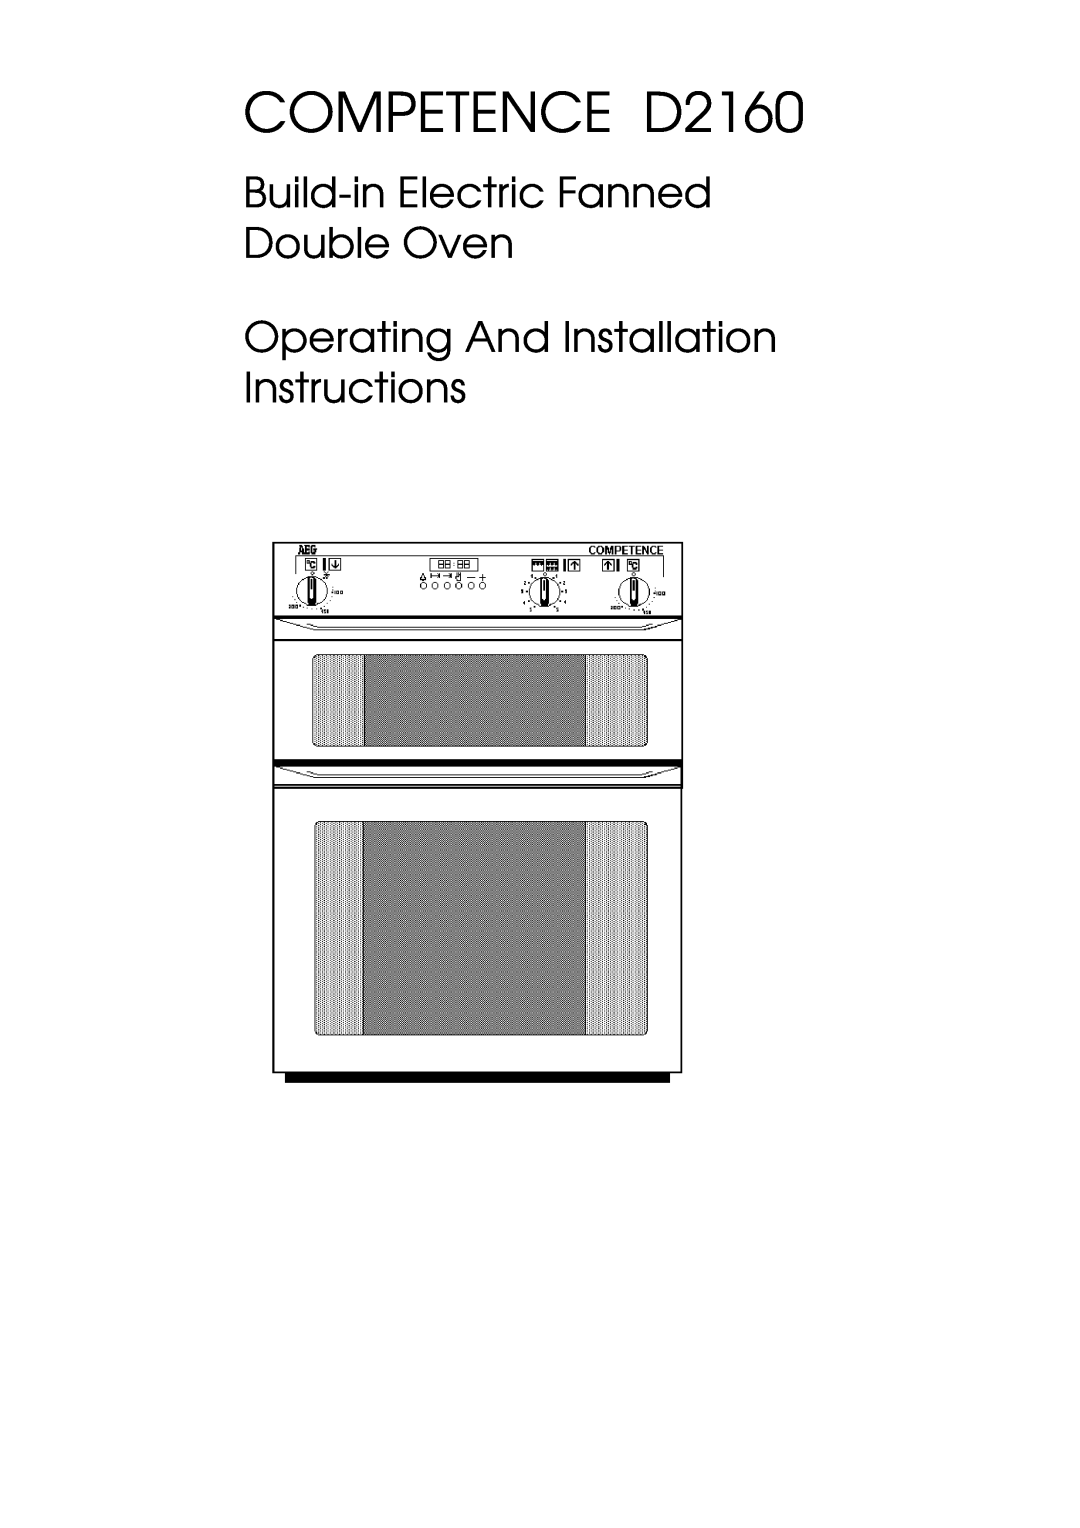 Electrolux installation instructions COMPETENCE D2160, Build-in Electric Fanned Double Oven 